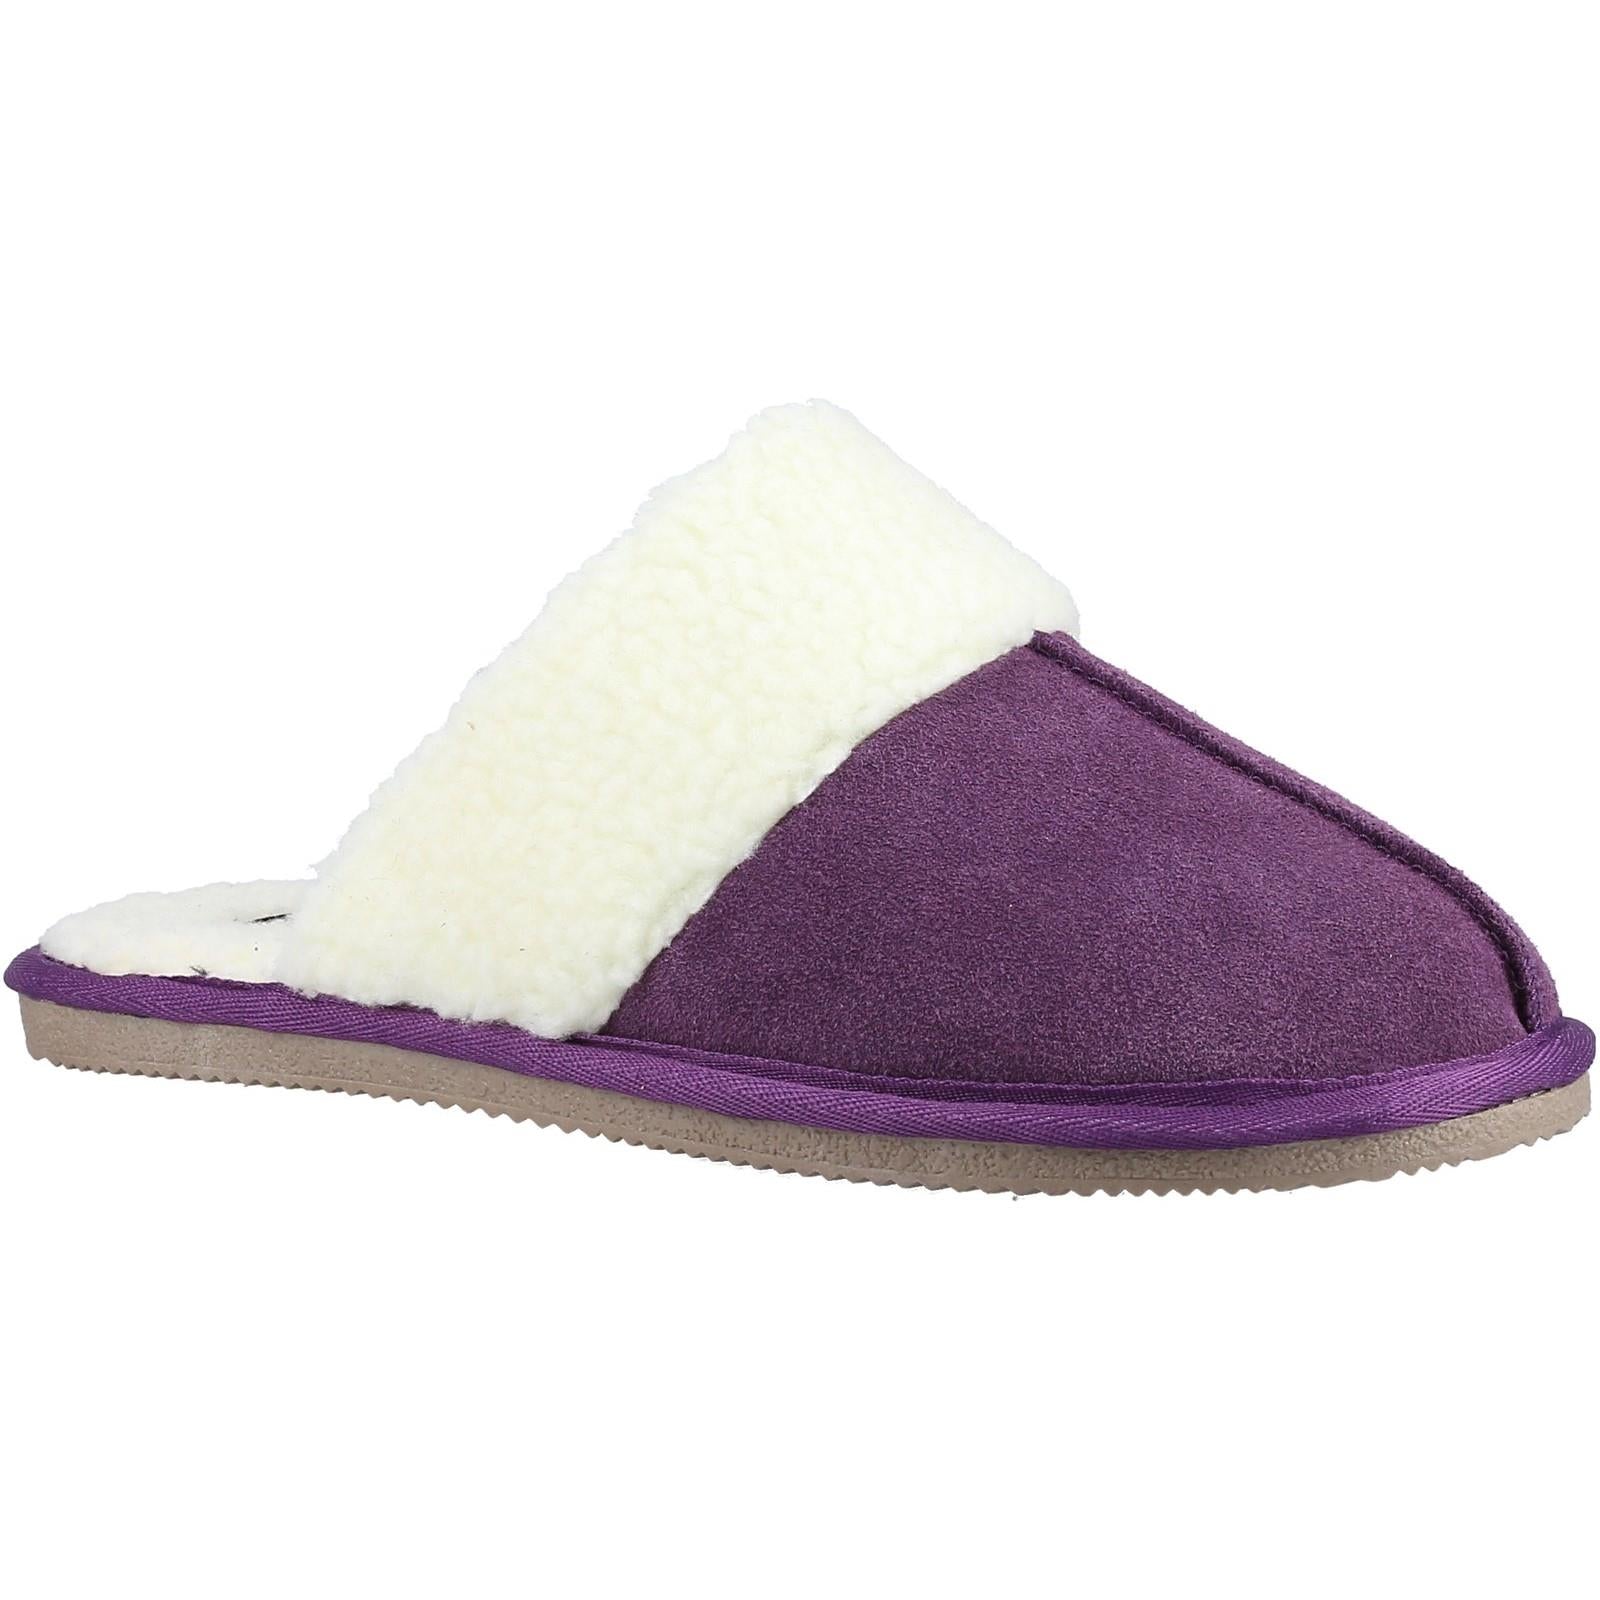 Hush Puppies Arianna purple suede leather upper mule ladies slippers